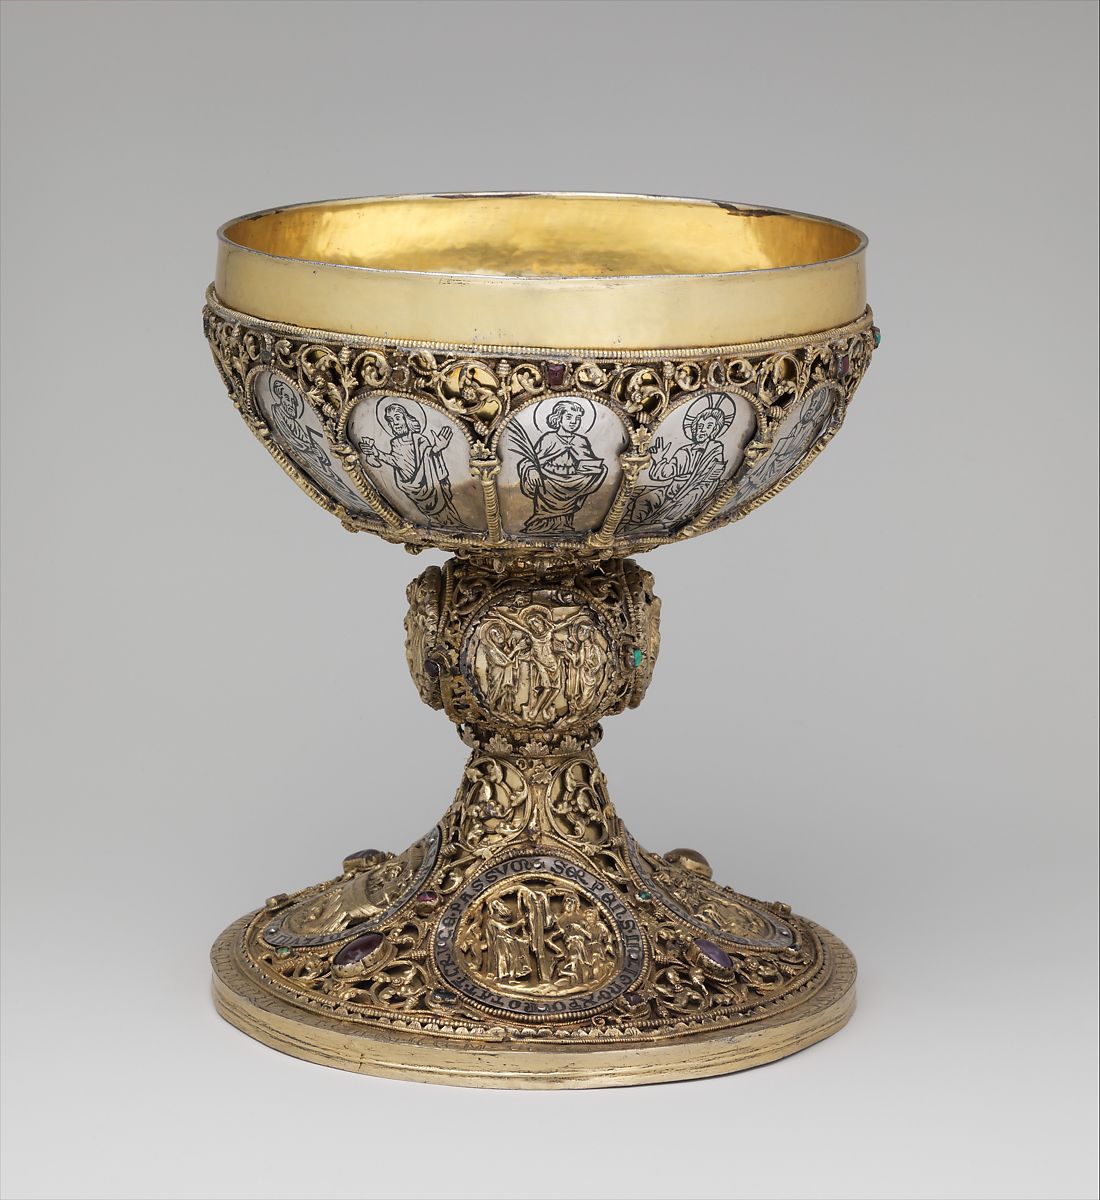 12/ The Venetians were honoured & assigned 1000 gold ducats to purchase gifts that ‘duly represented the Republic’ in return. An especially precious chalice was taken out of the Sanctuary of St. Mark to be shipped. The Venetian Senate also ruled that Anthonius was allowed ...